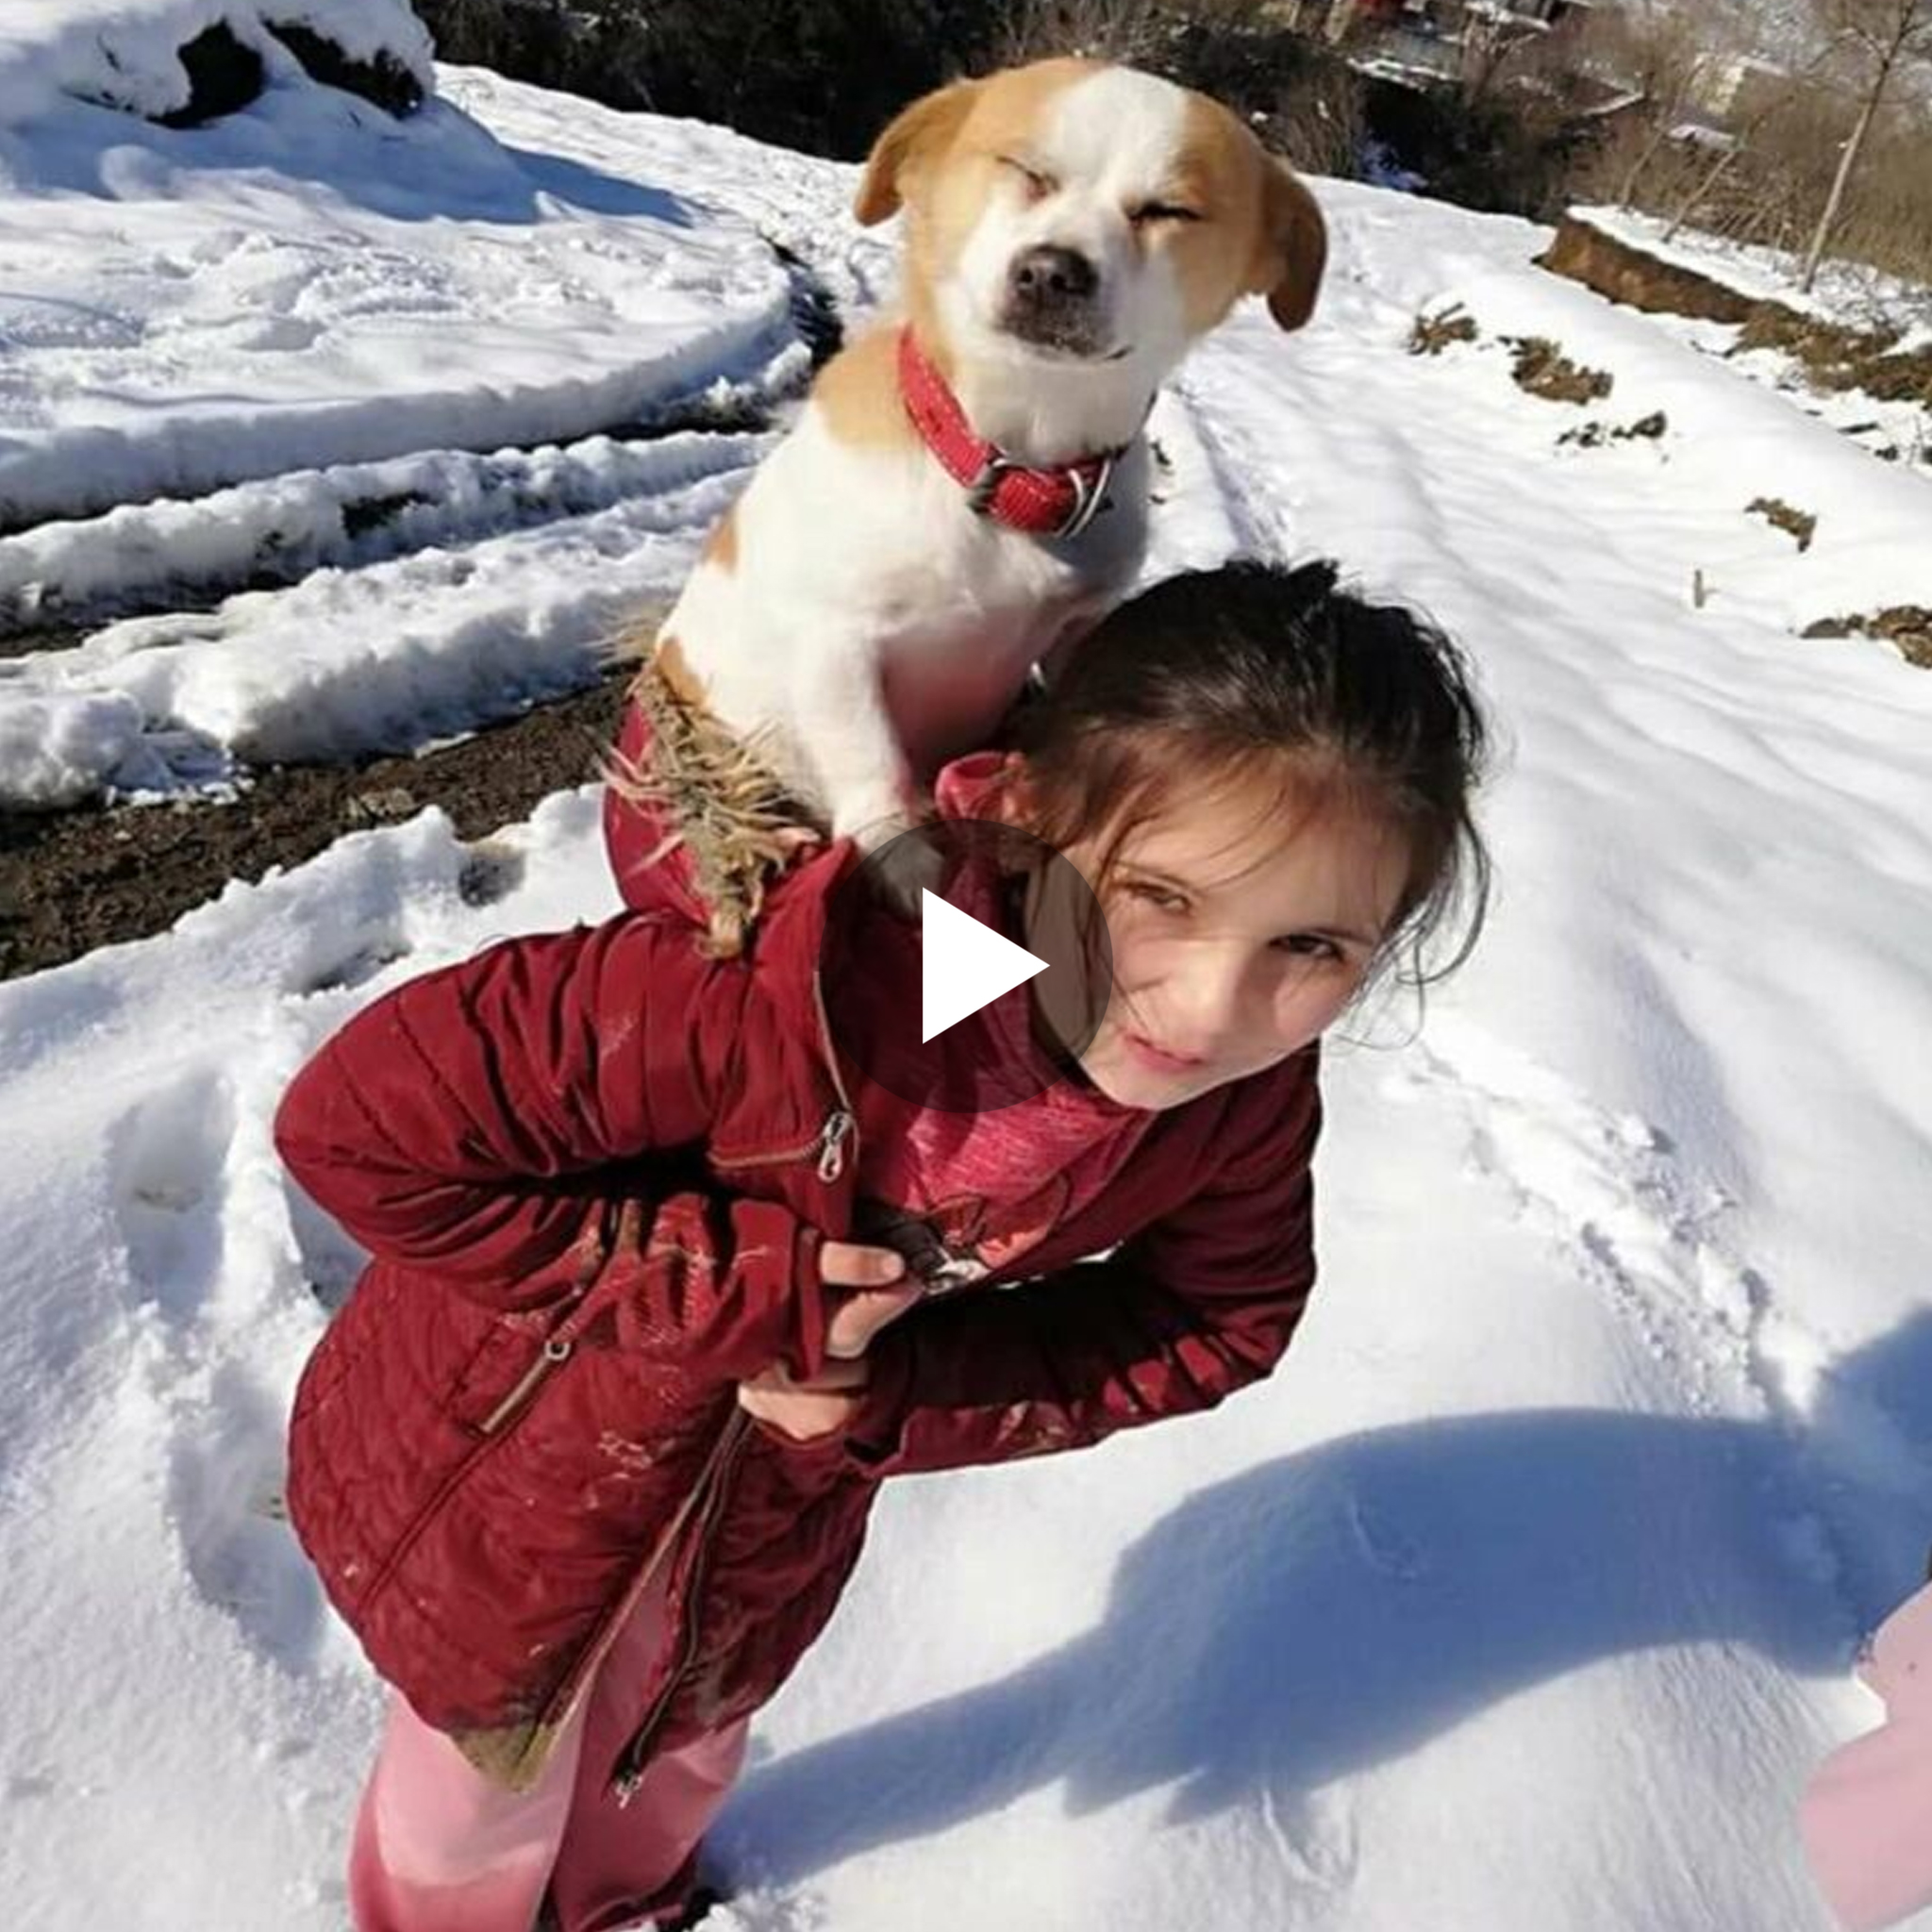 Compassionate Heroine: Fearless Girl Braves the Snow to Aid Ailing Pets, Melting the Hearts of Millions.